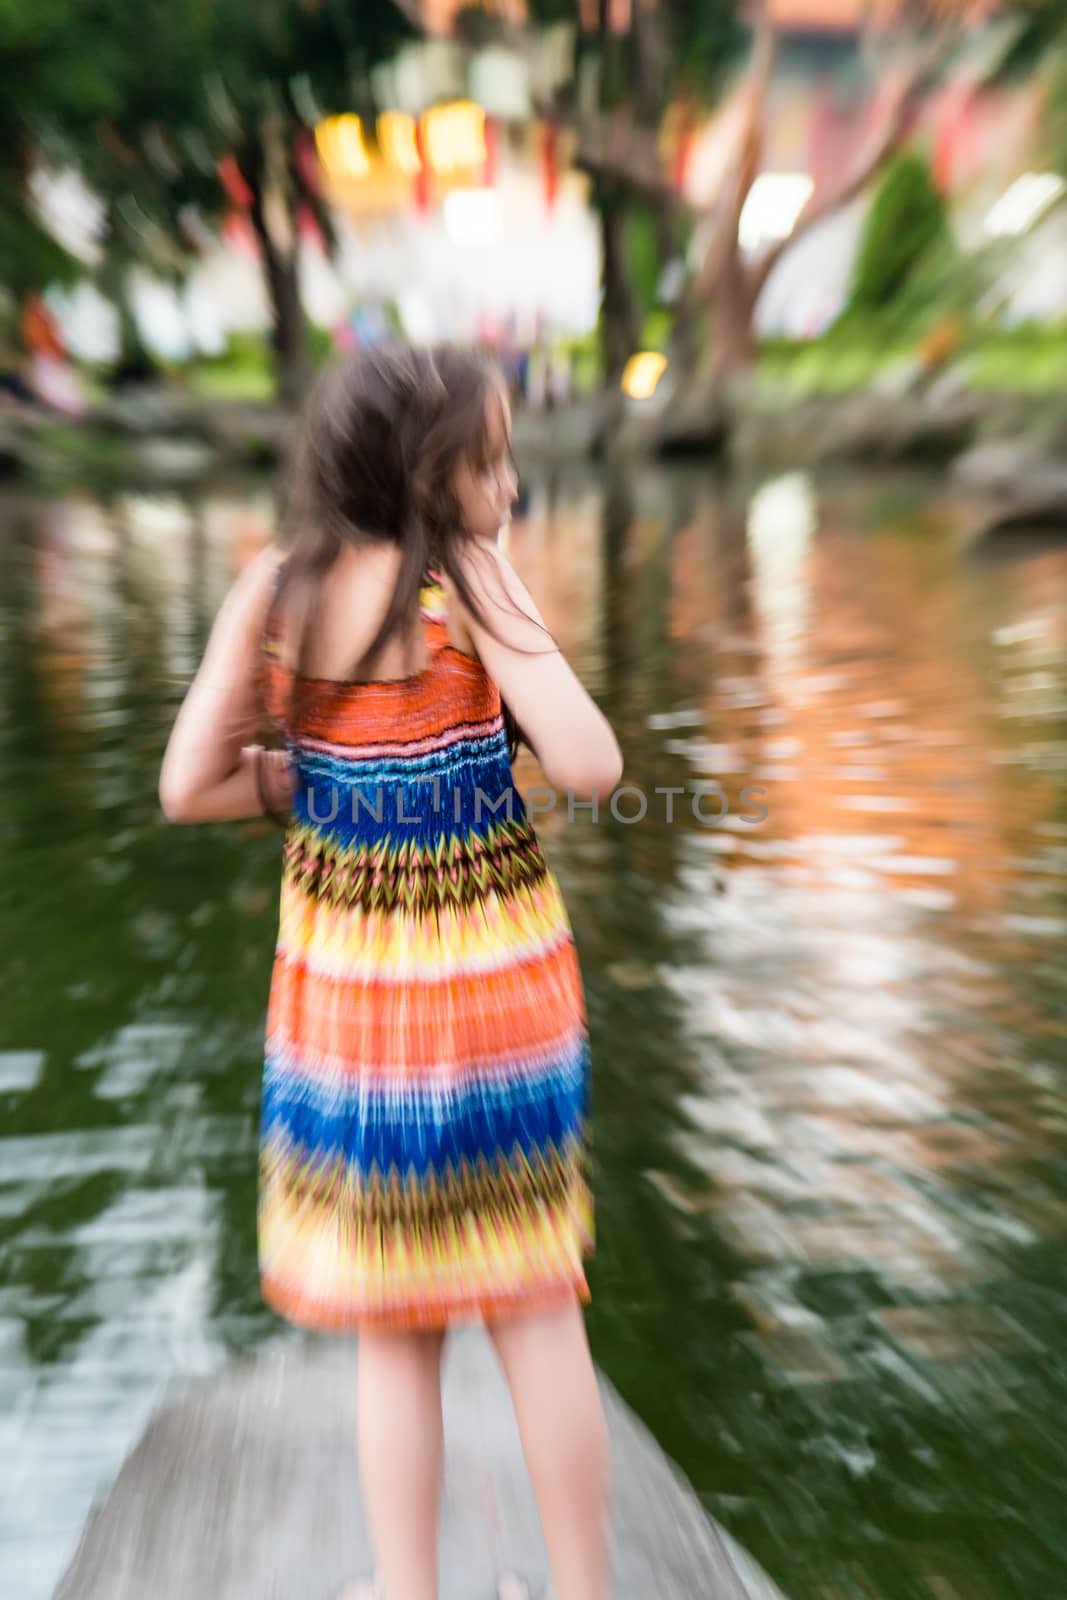 Young girl in colorful dress by lake, defocused